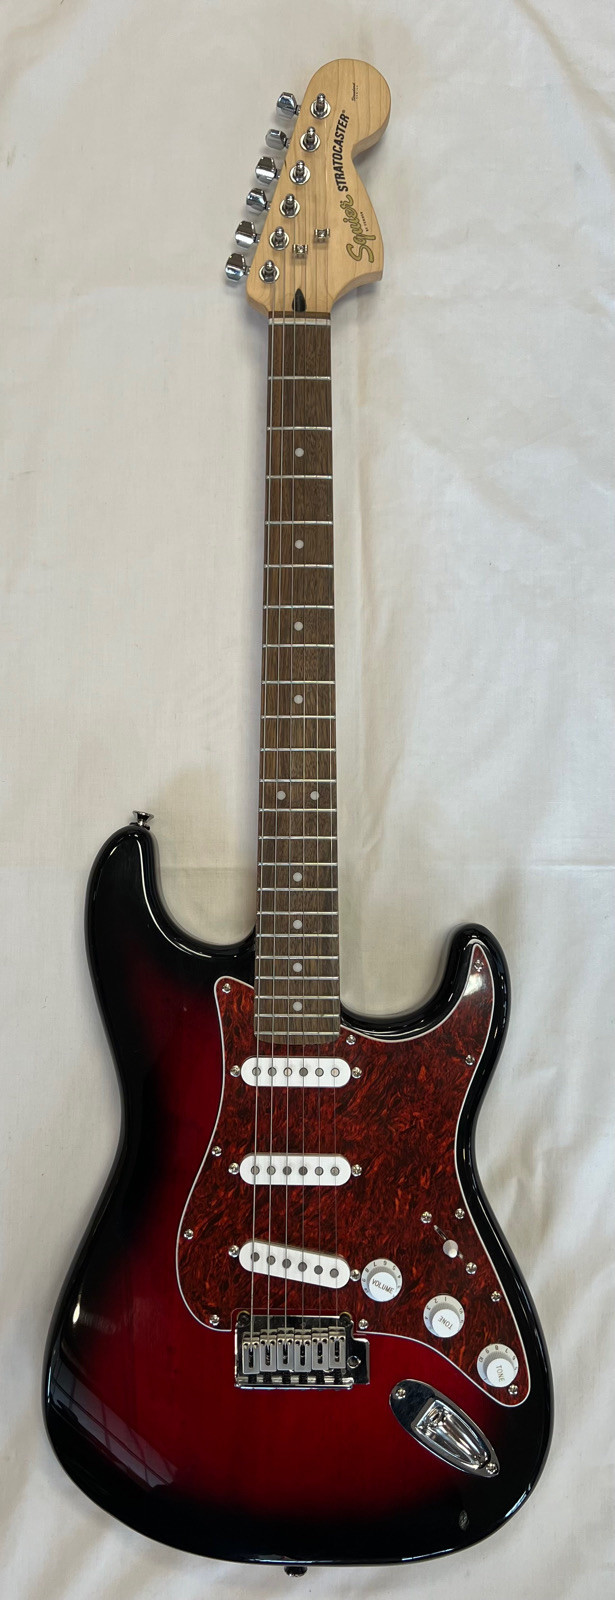 Squier Stratocaster Electric Guitar in Guitars in Thunder Bay - Image 3